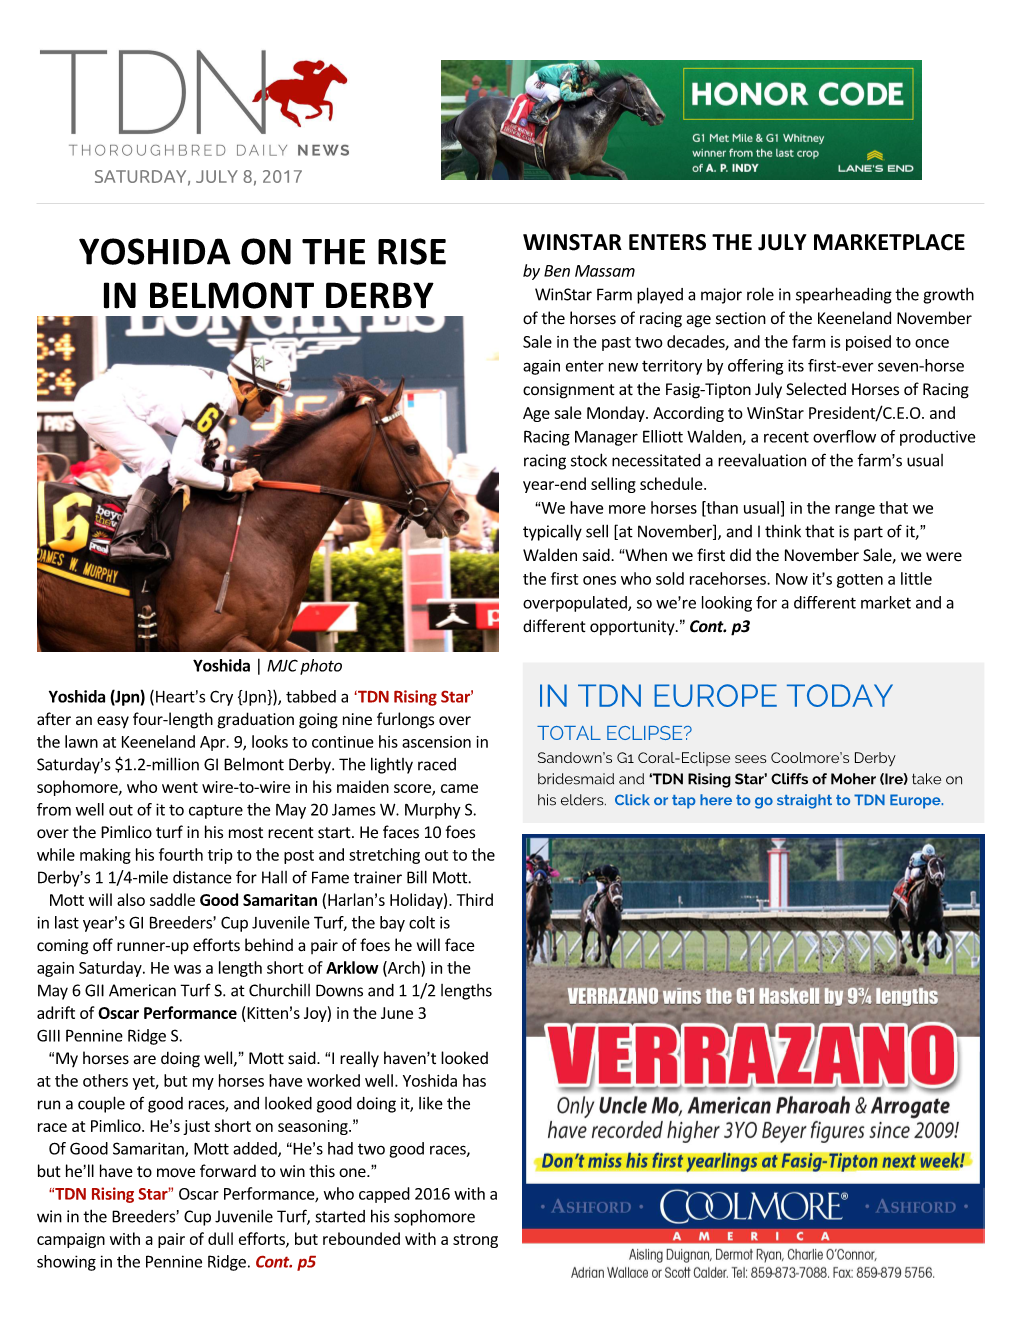 Yoshida on the Rise in Belmont Derby Cont